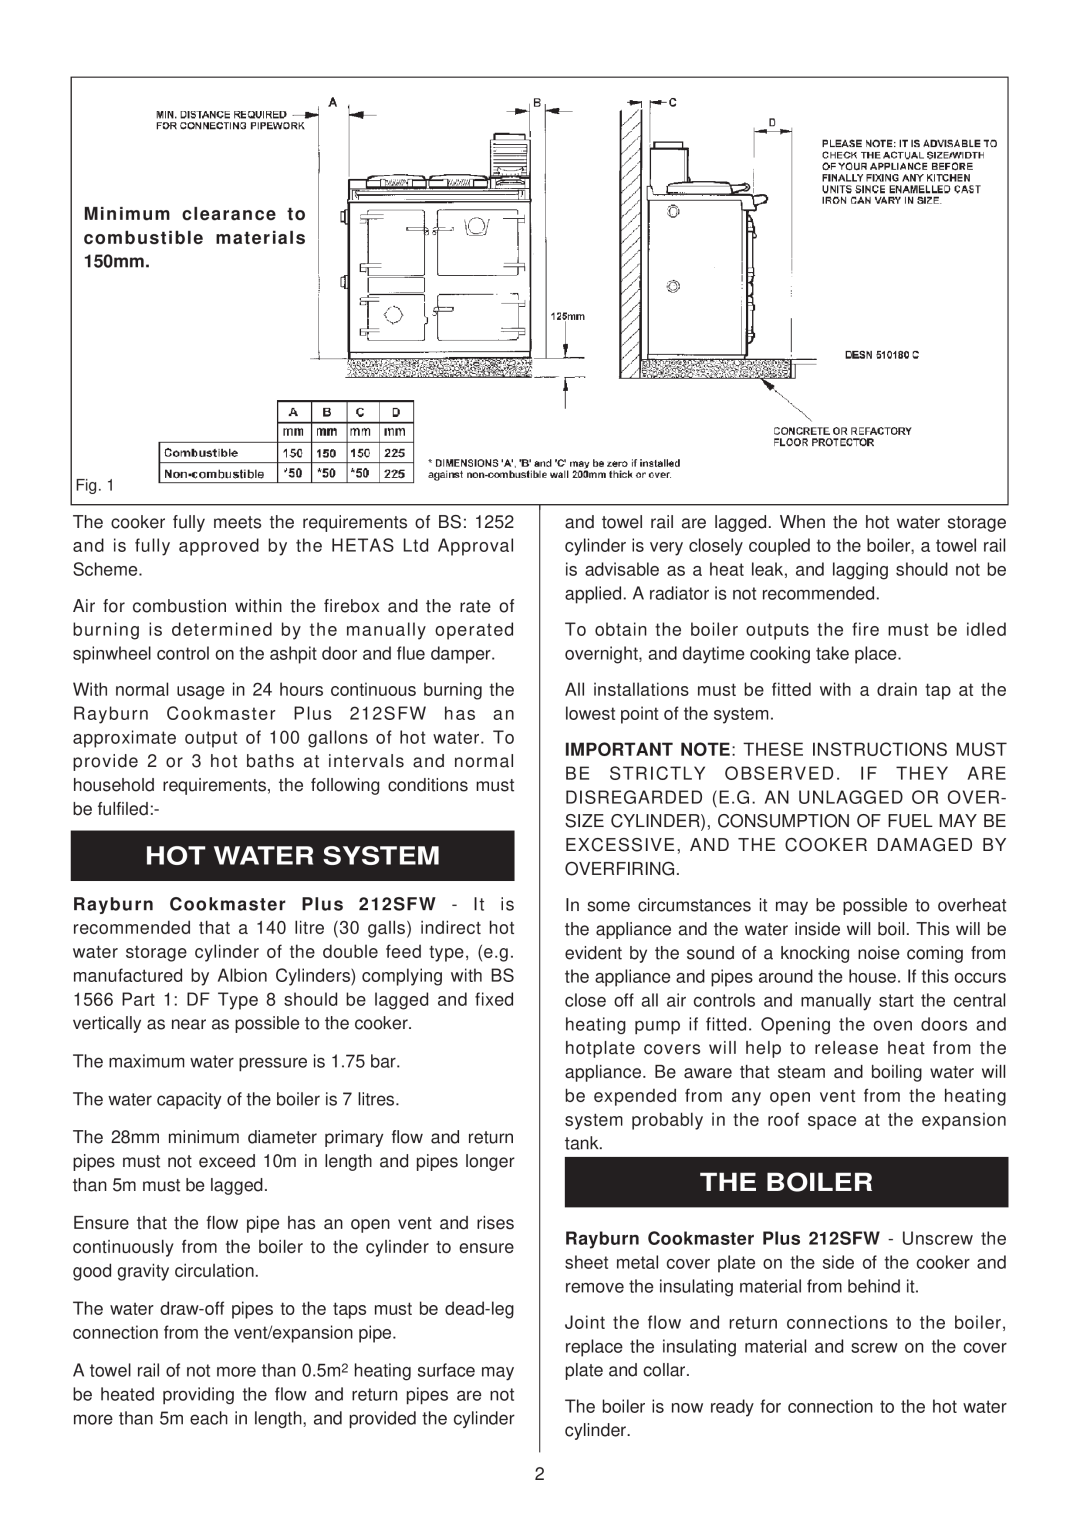 Rayburn 212SFW, 200SFW installation instructions Hot Water System, The Boiler 